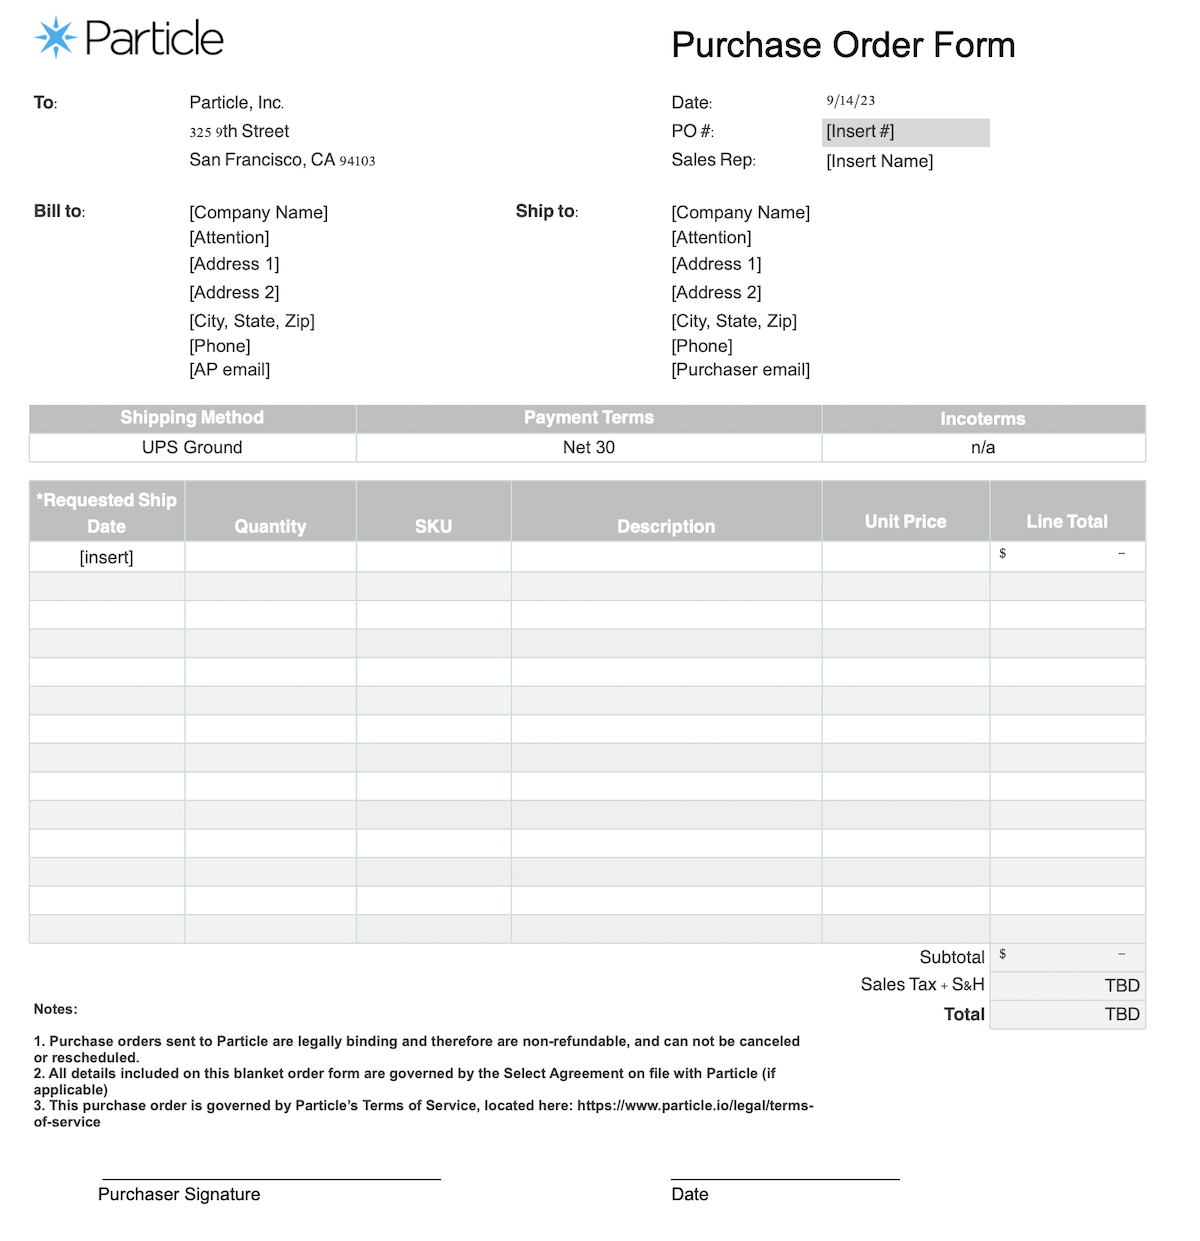 Example purchase order